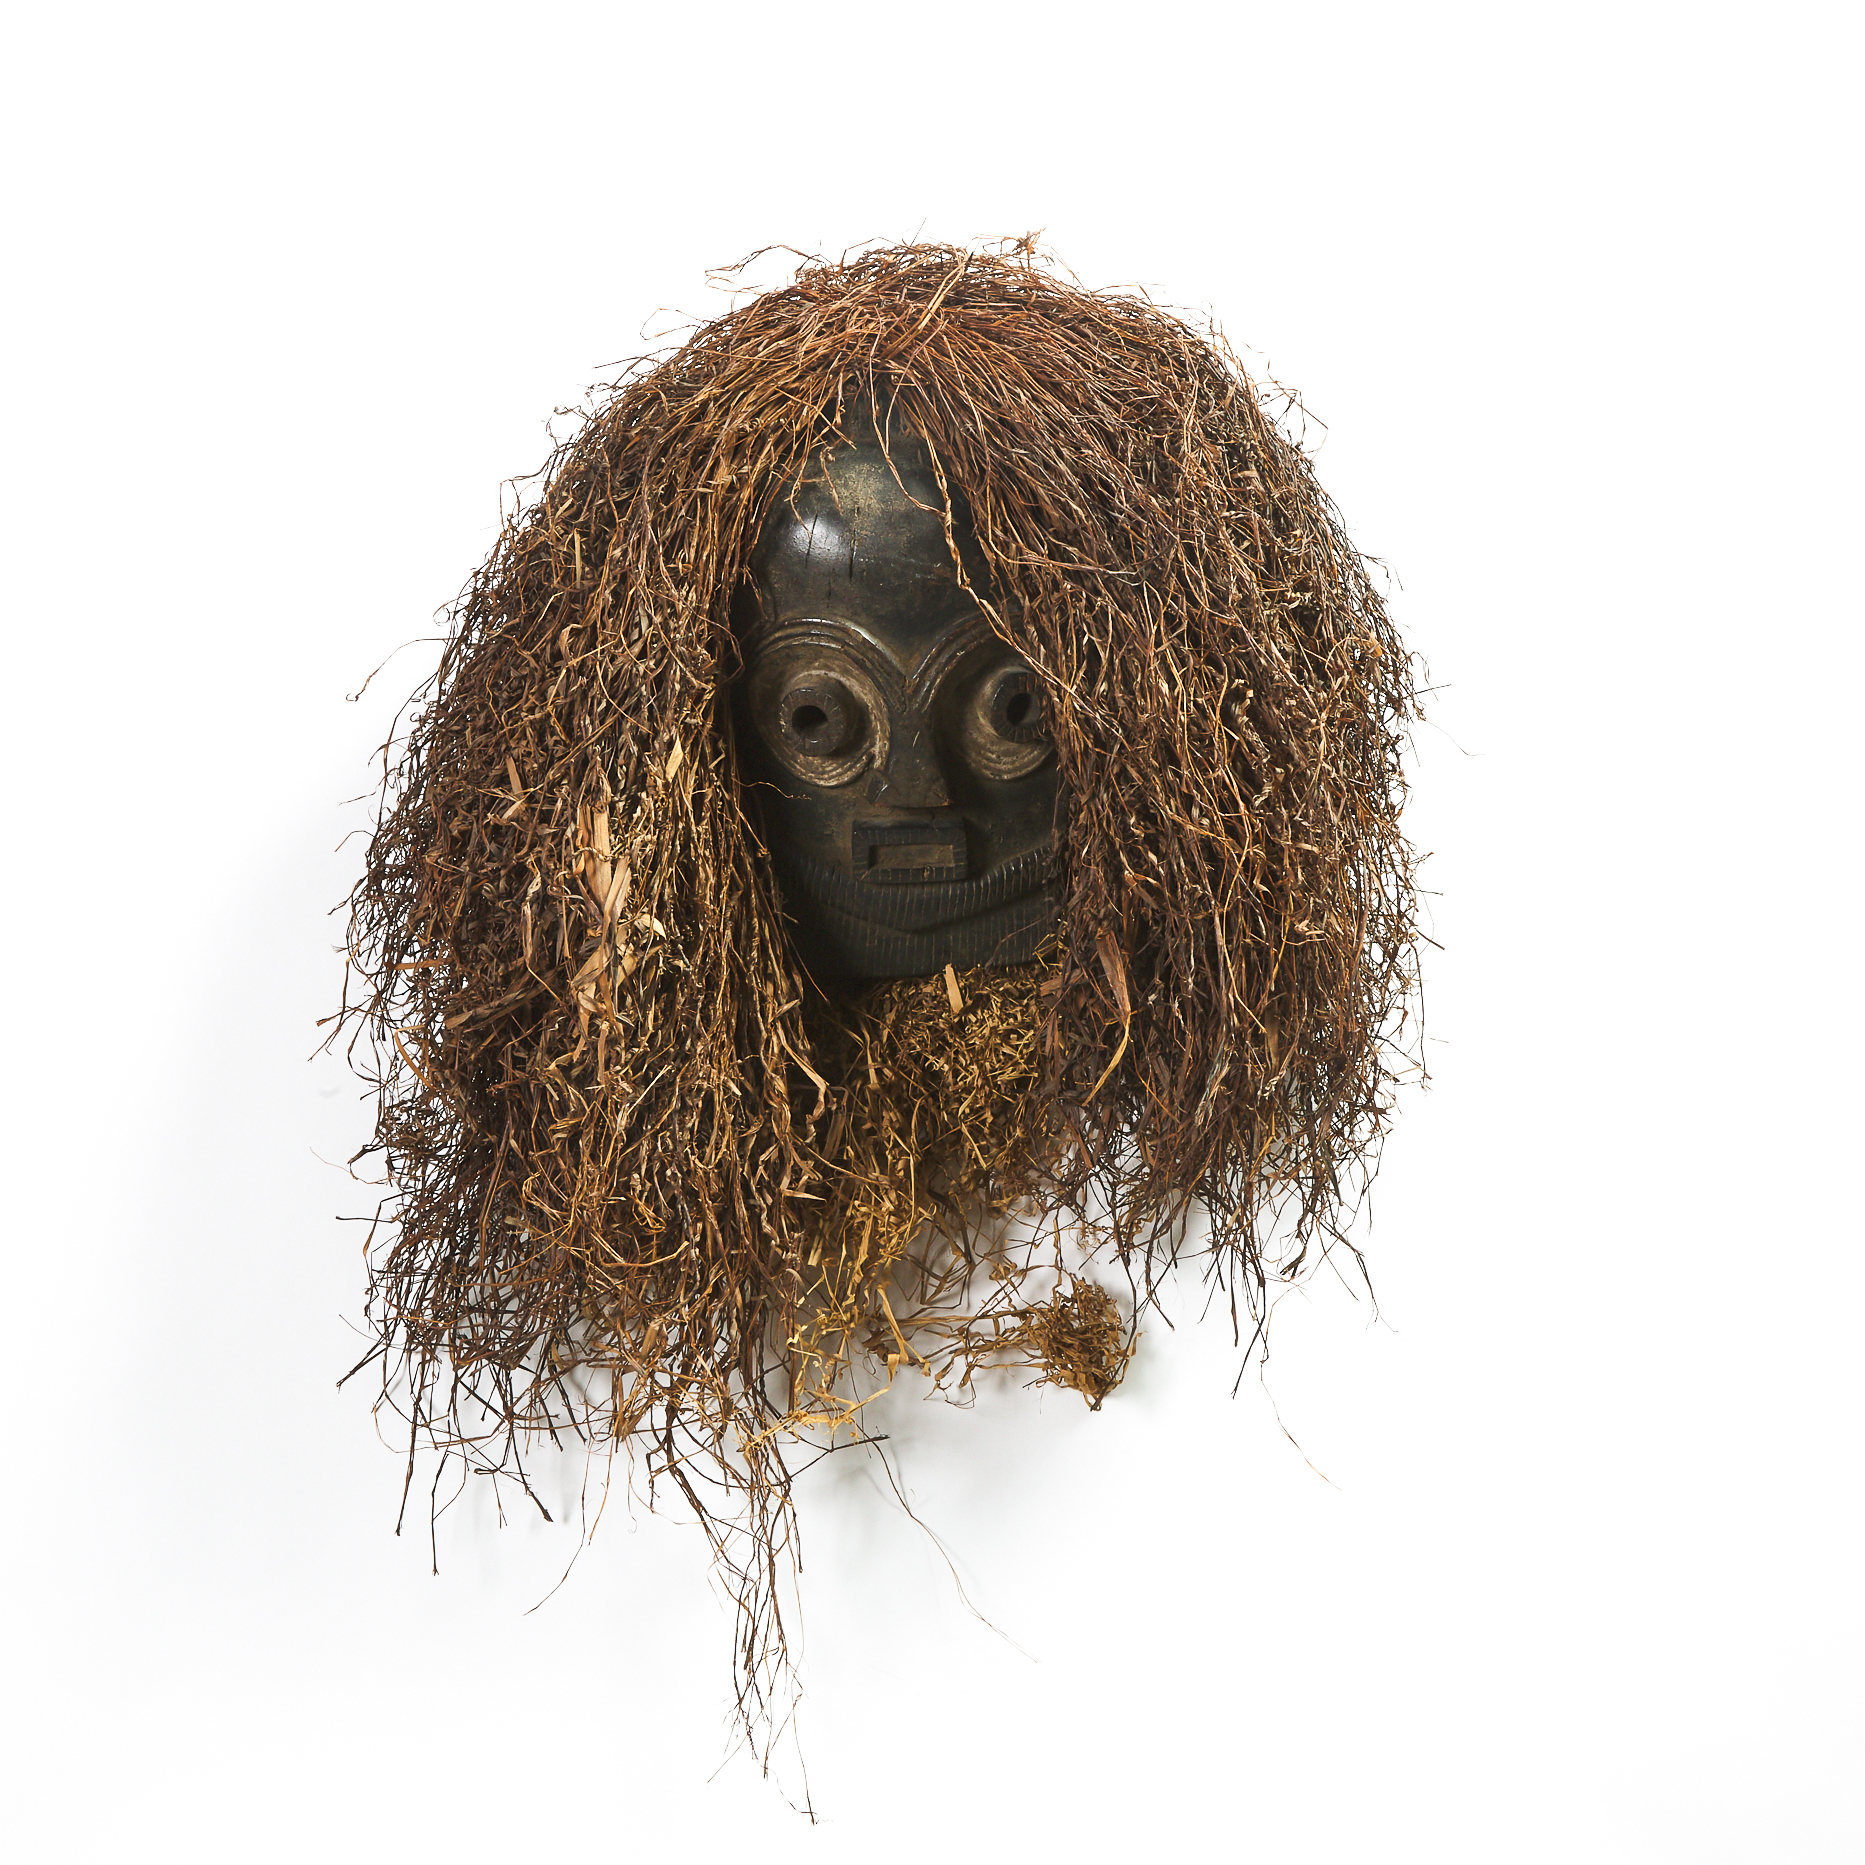 Basikasingo Bembe Mask, Democratic Republic of Congo, Central Africa, early to mid 20th century